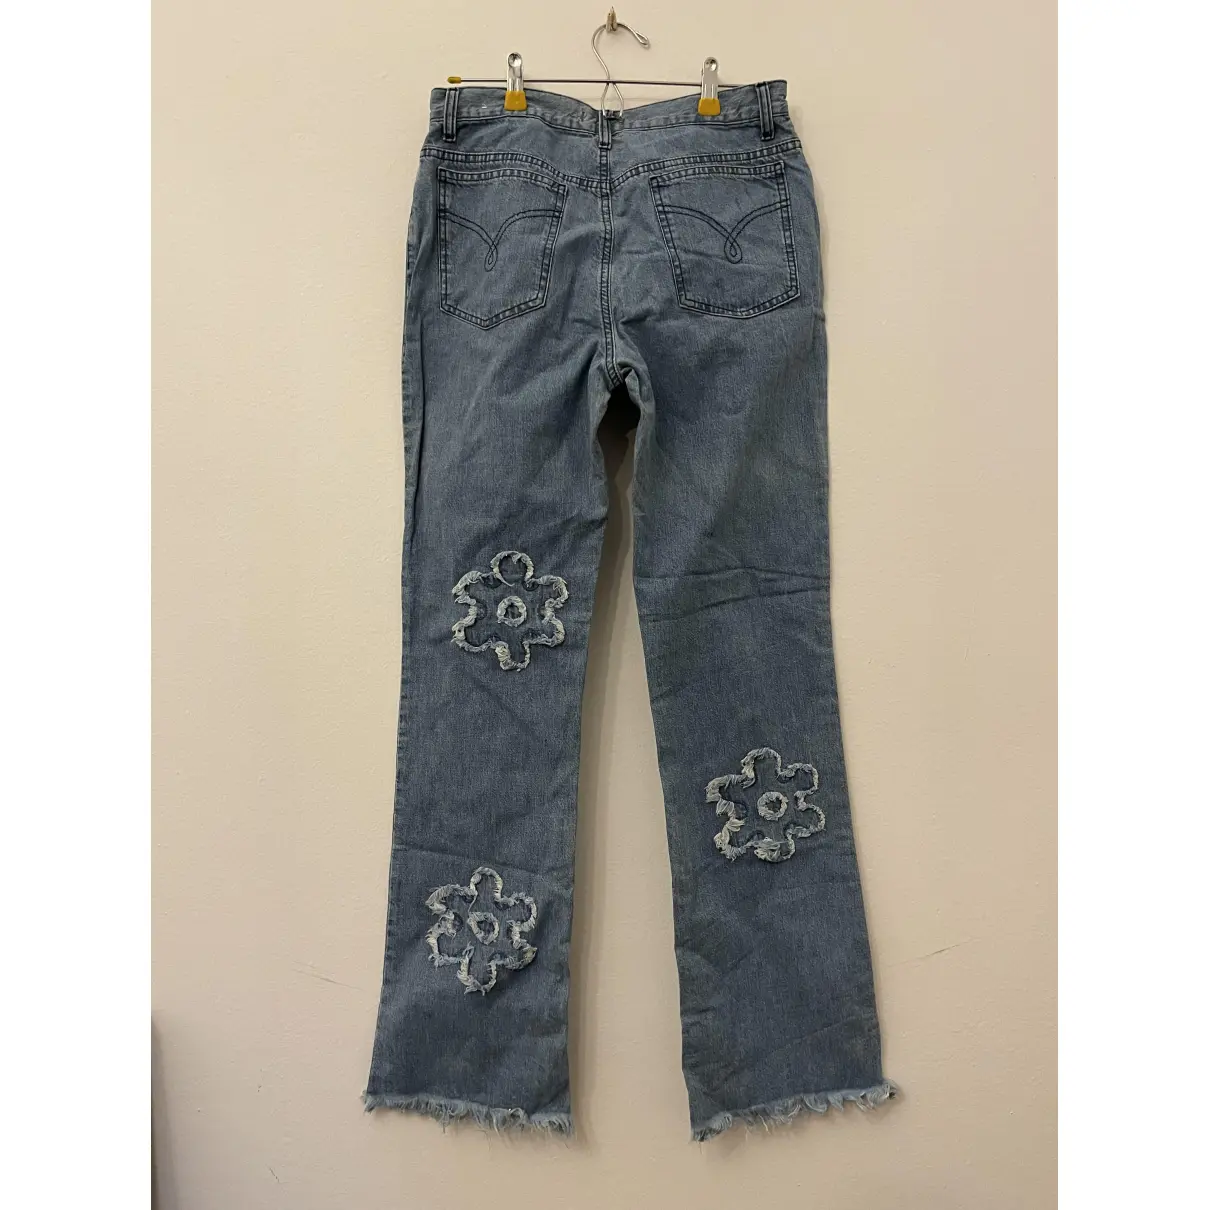 Buy Moschino Cheap And Chic Blue Cotton Jeans online